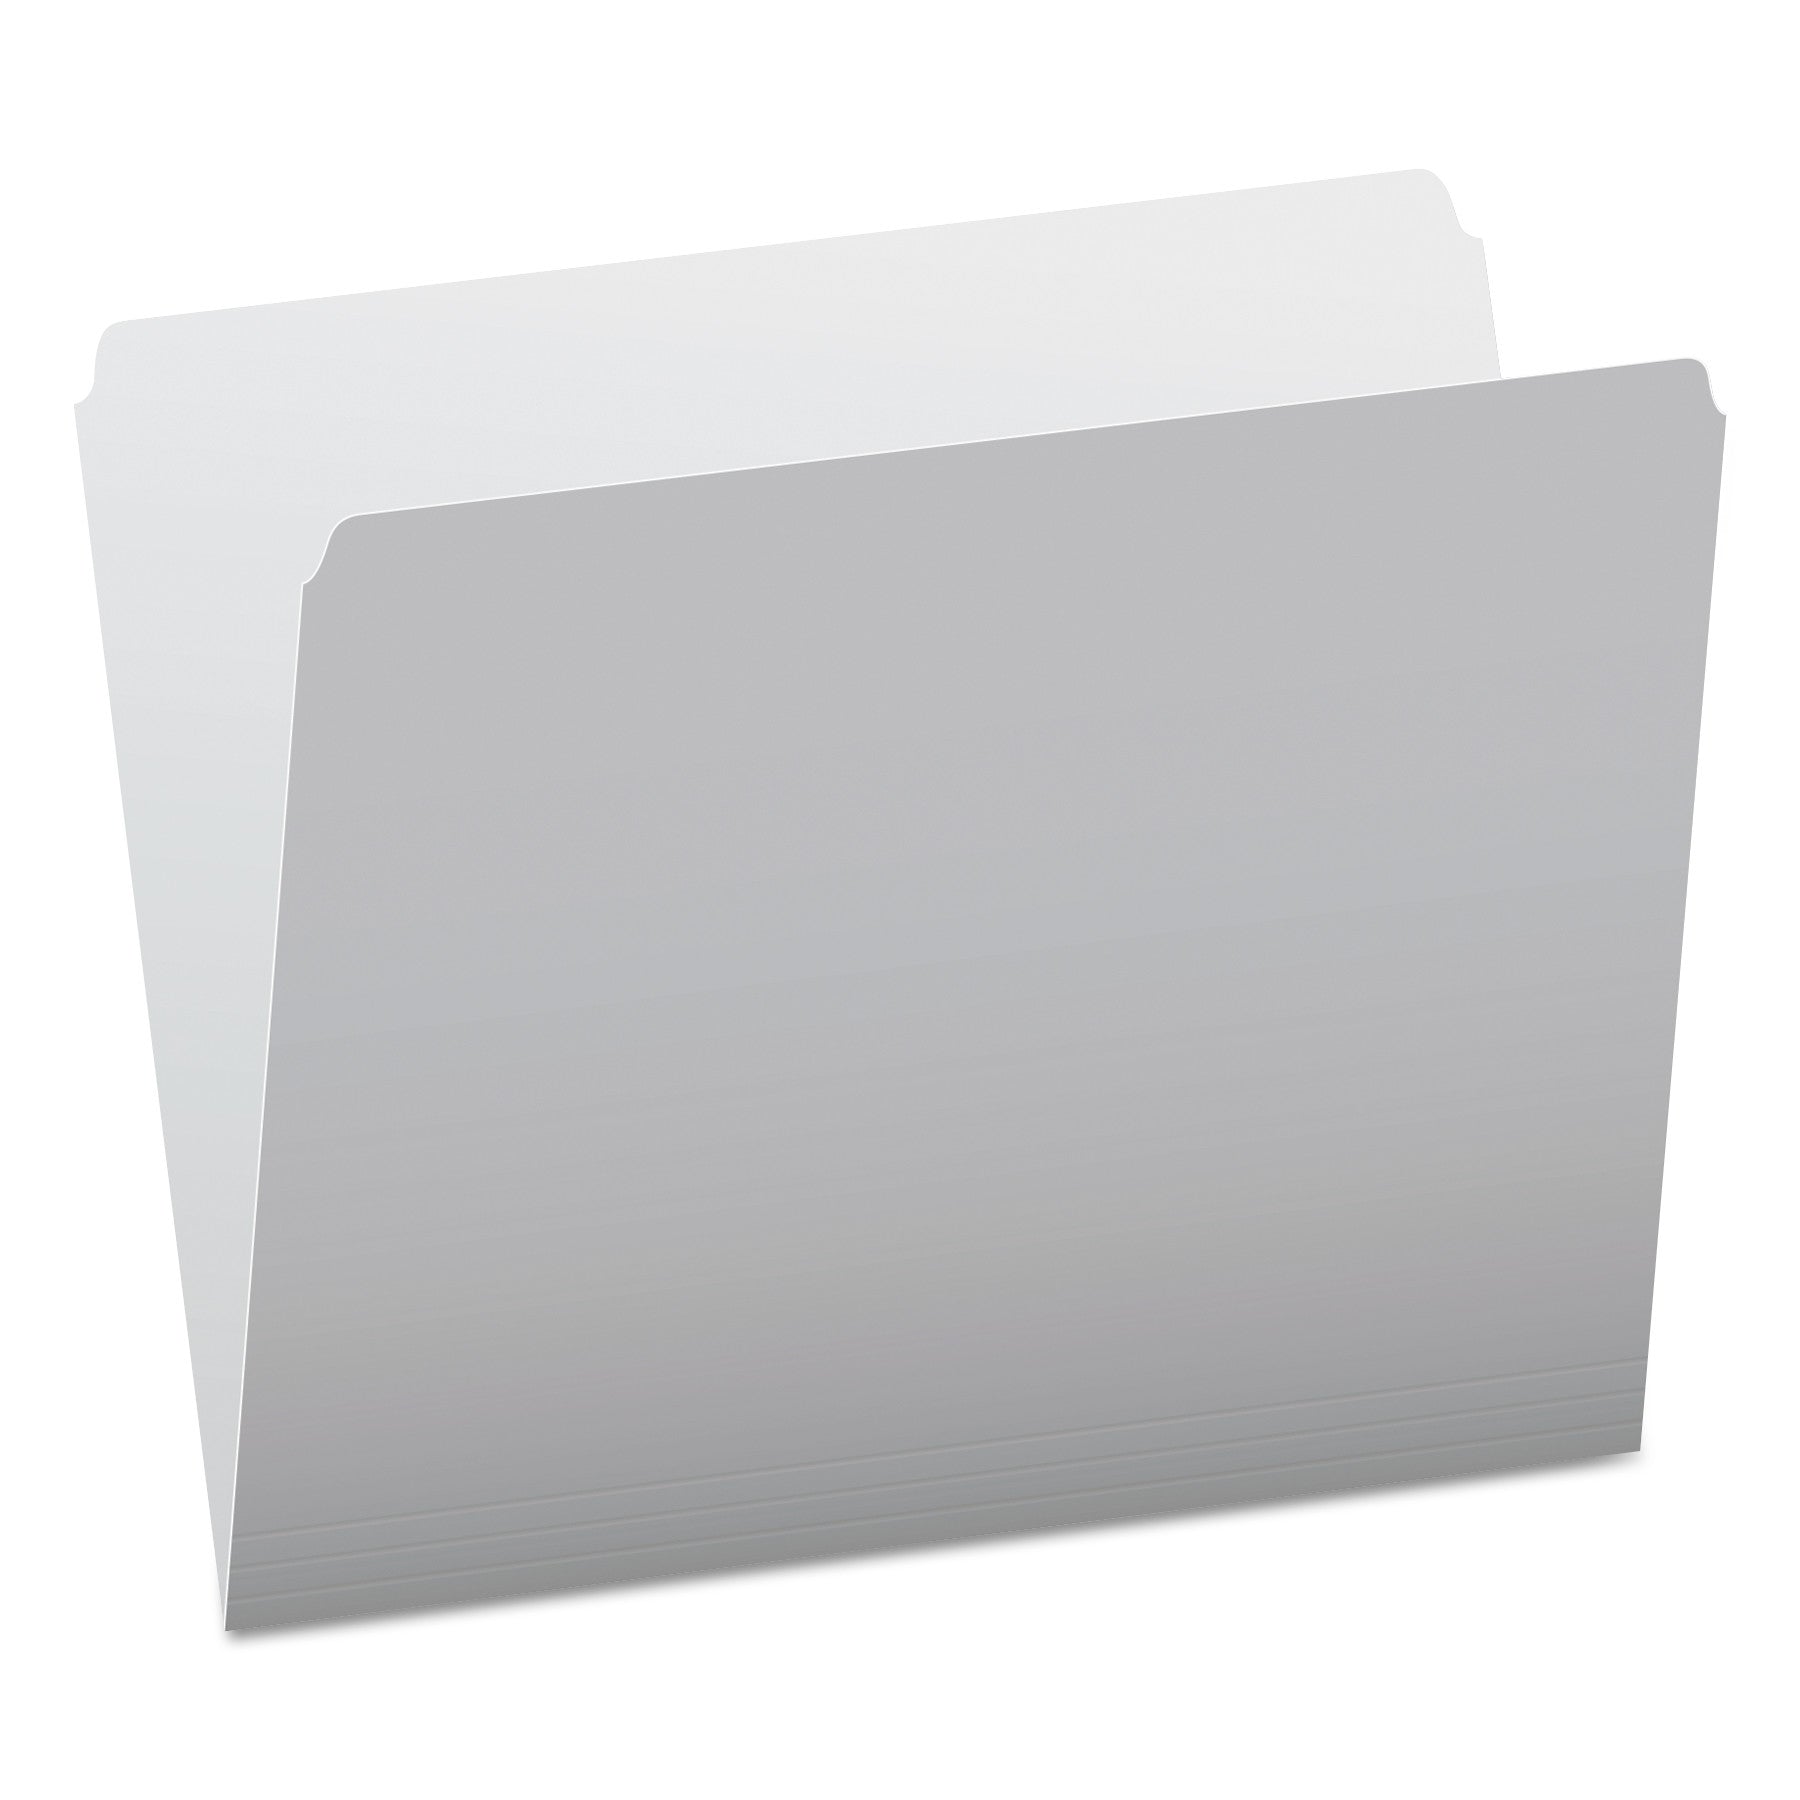 Colored File Folders, Straight Tabs, Letter Size, Gray/Light Gray, 100/Box - 